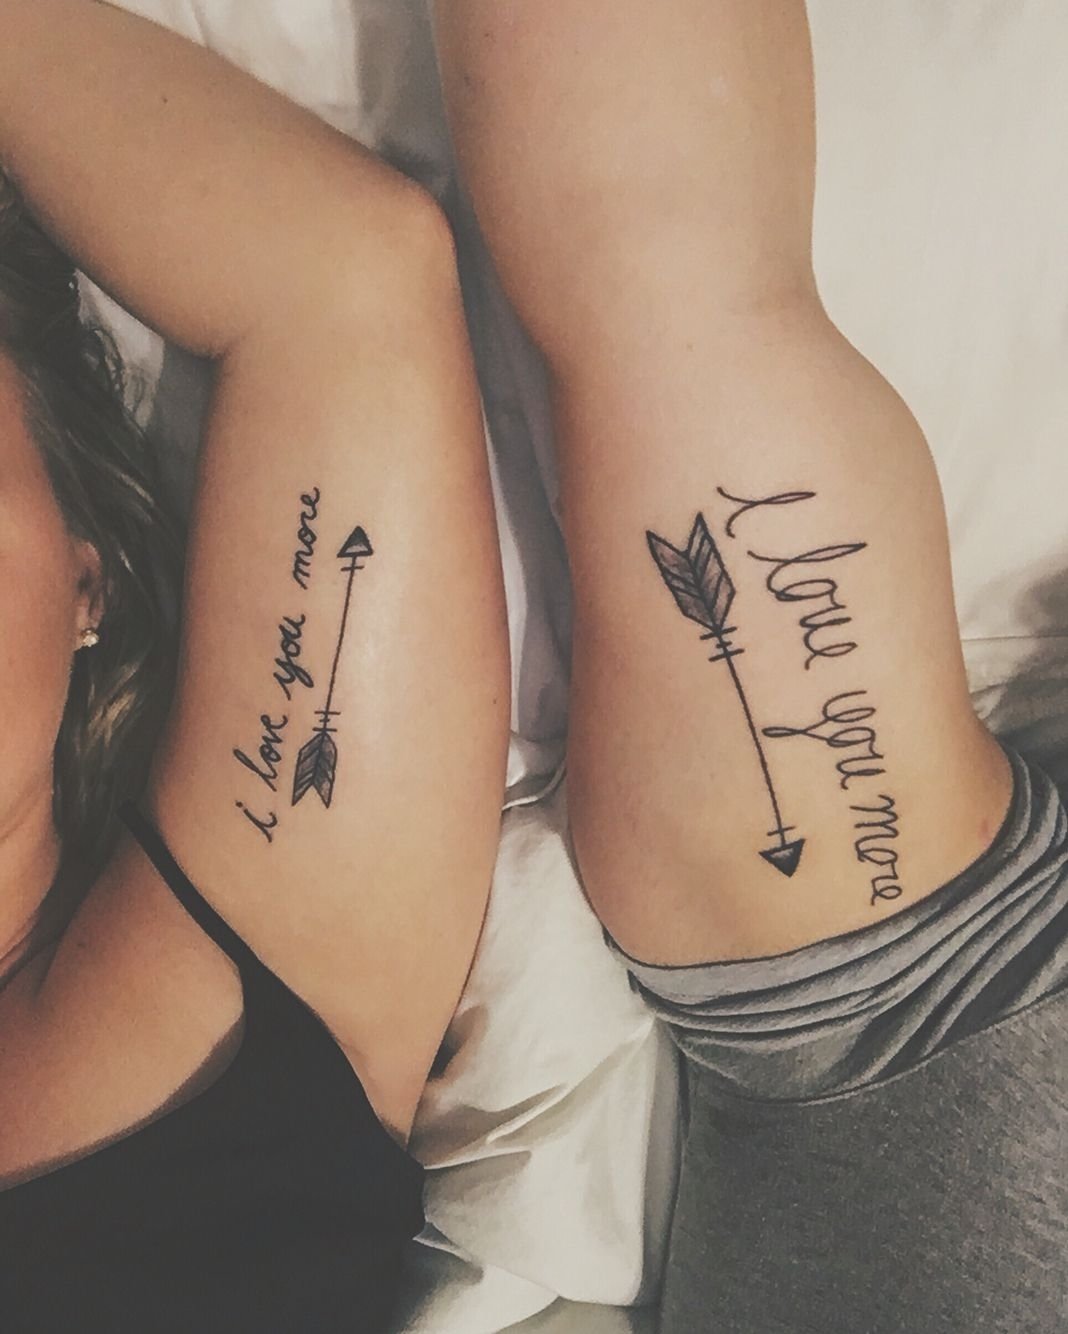 10 Attractive Tattoo Ideas For Married Couples bicep tattoo couple tattoo i love you more handwritten tattoo 1 2022